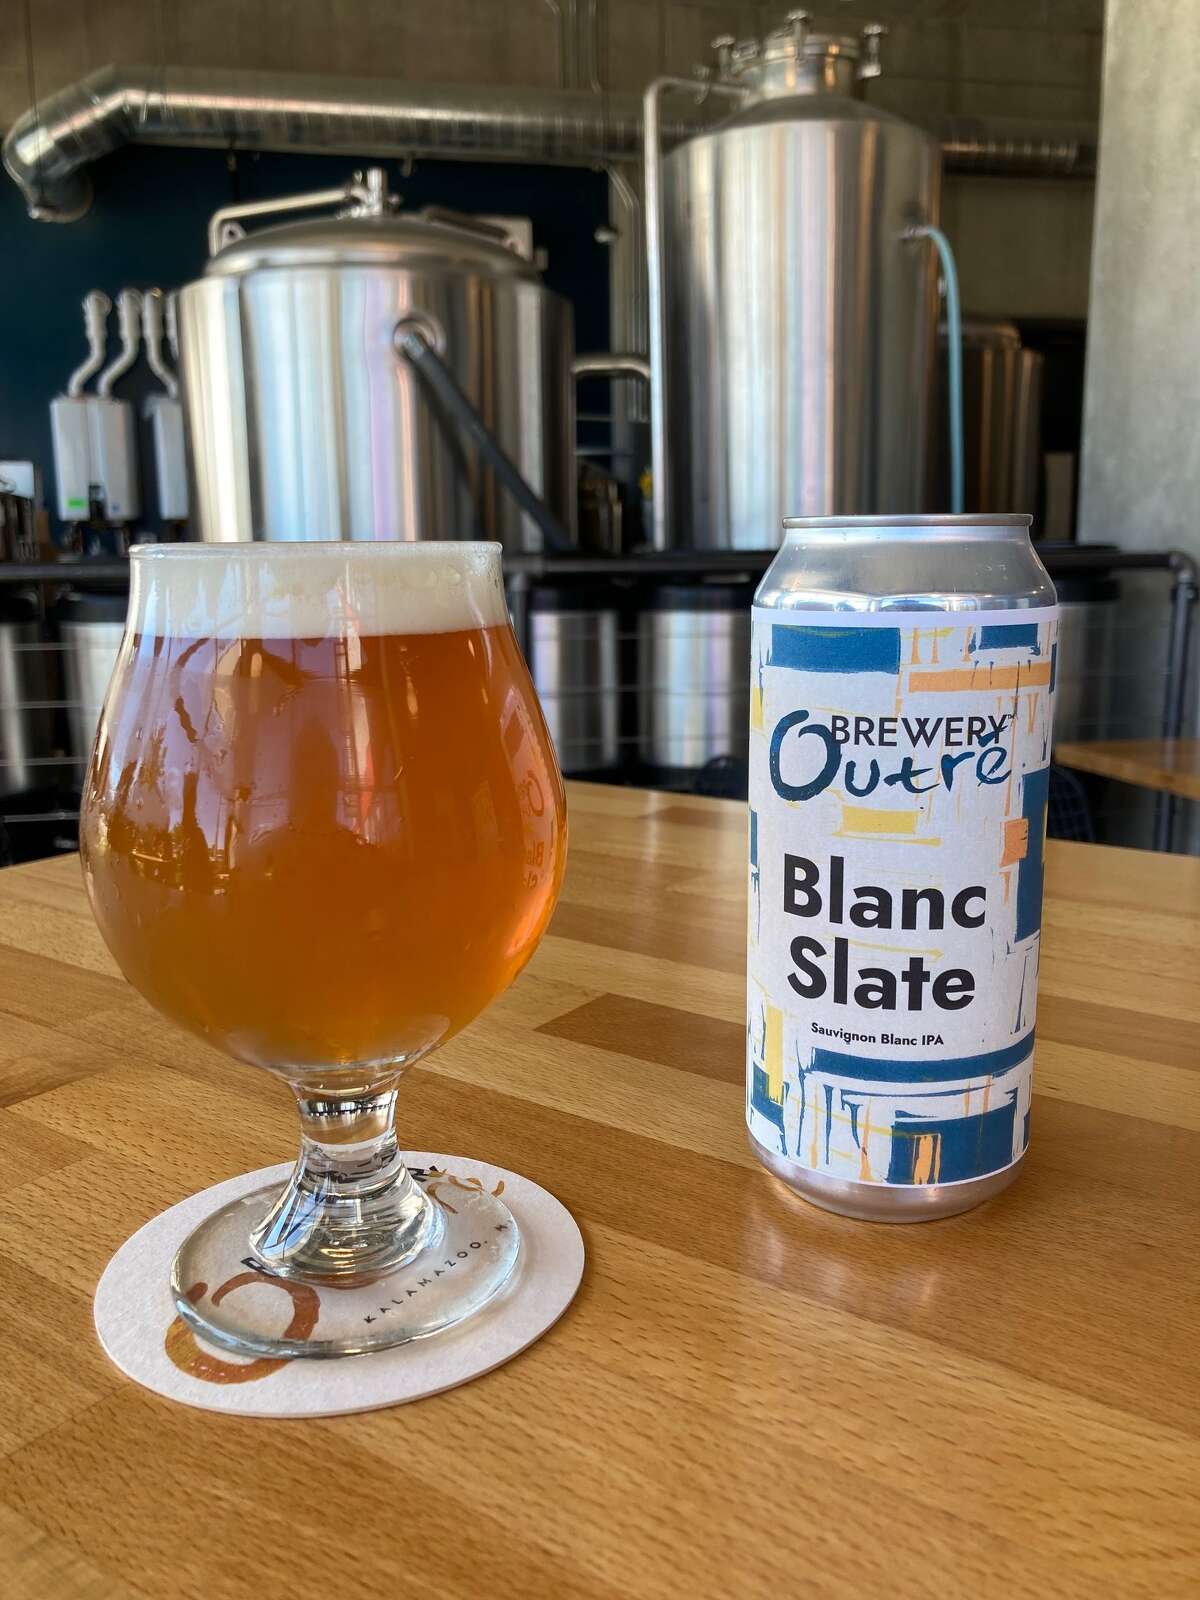 Kalamazoo-based Brewery Outre’s current beer menu has four beer-wine hybrids, including two sours, and two IPAs.